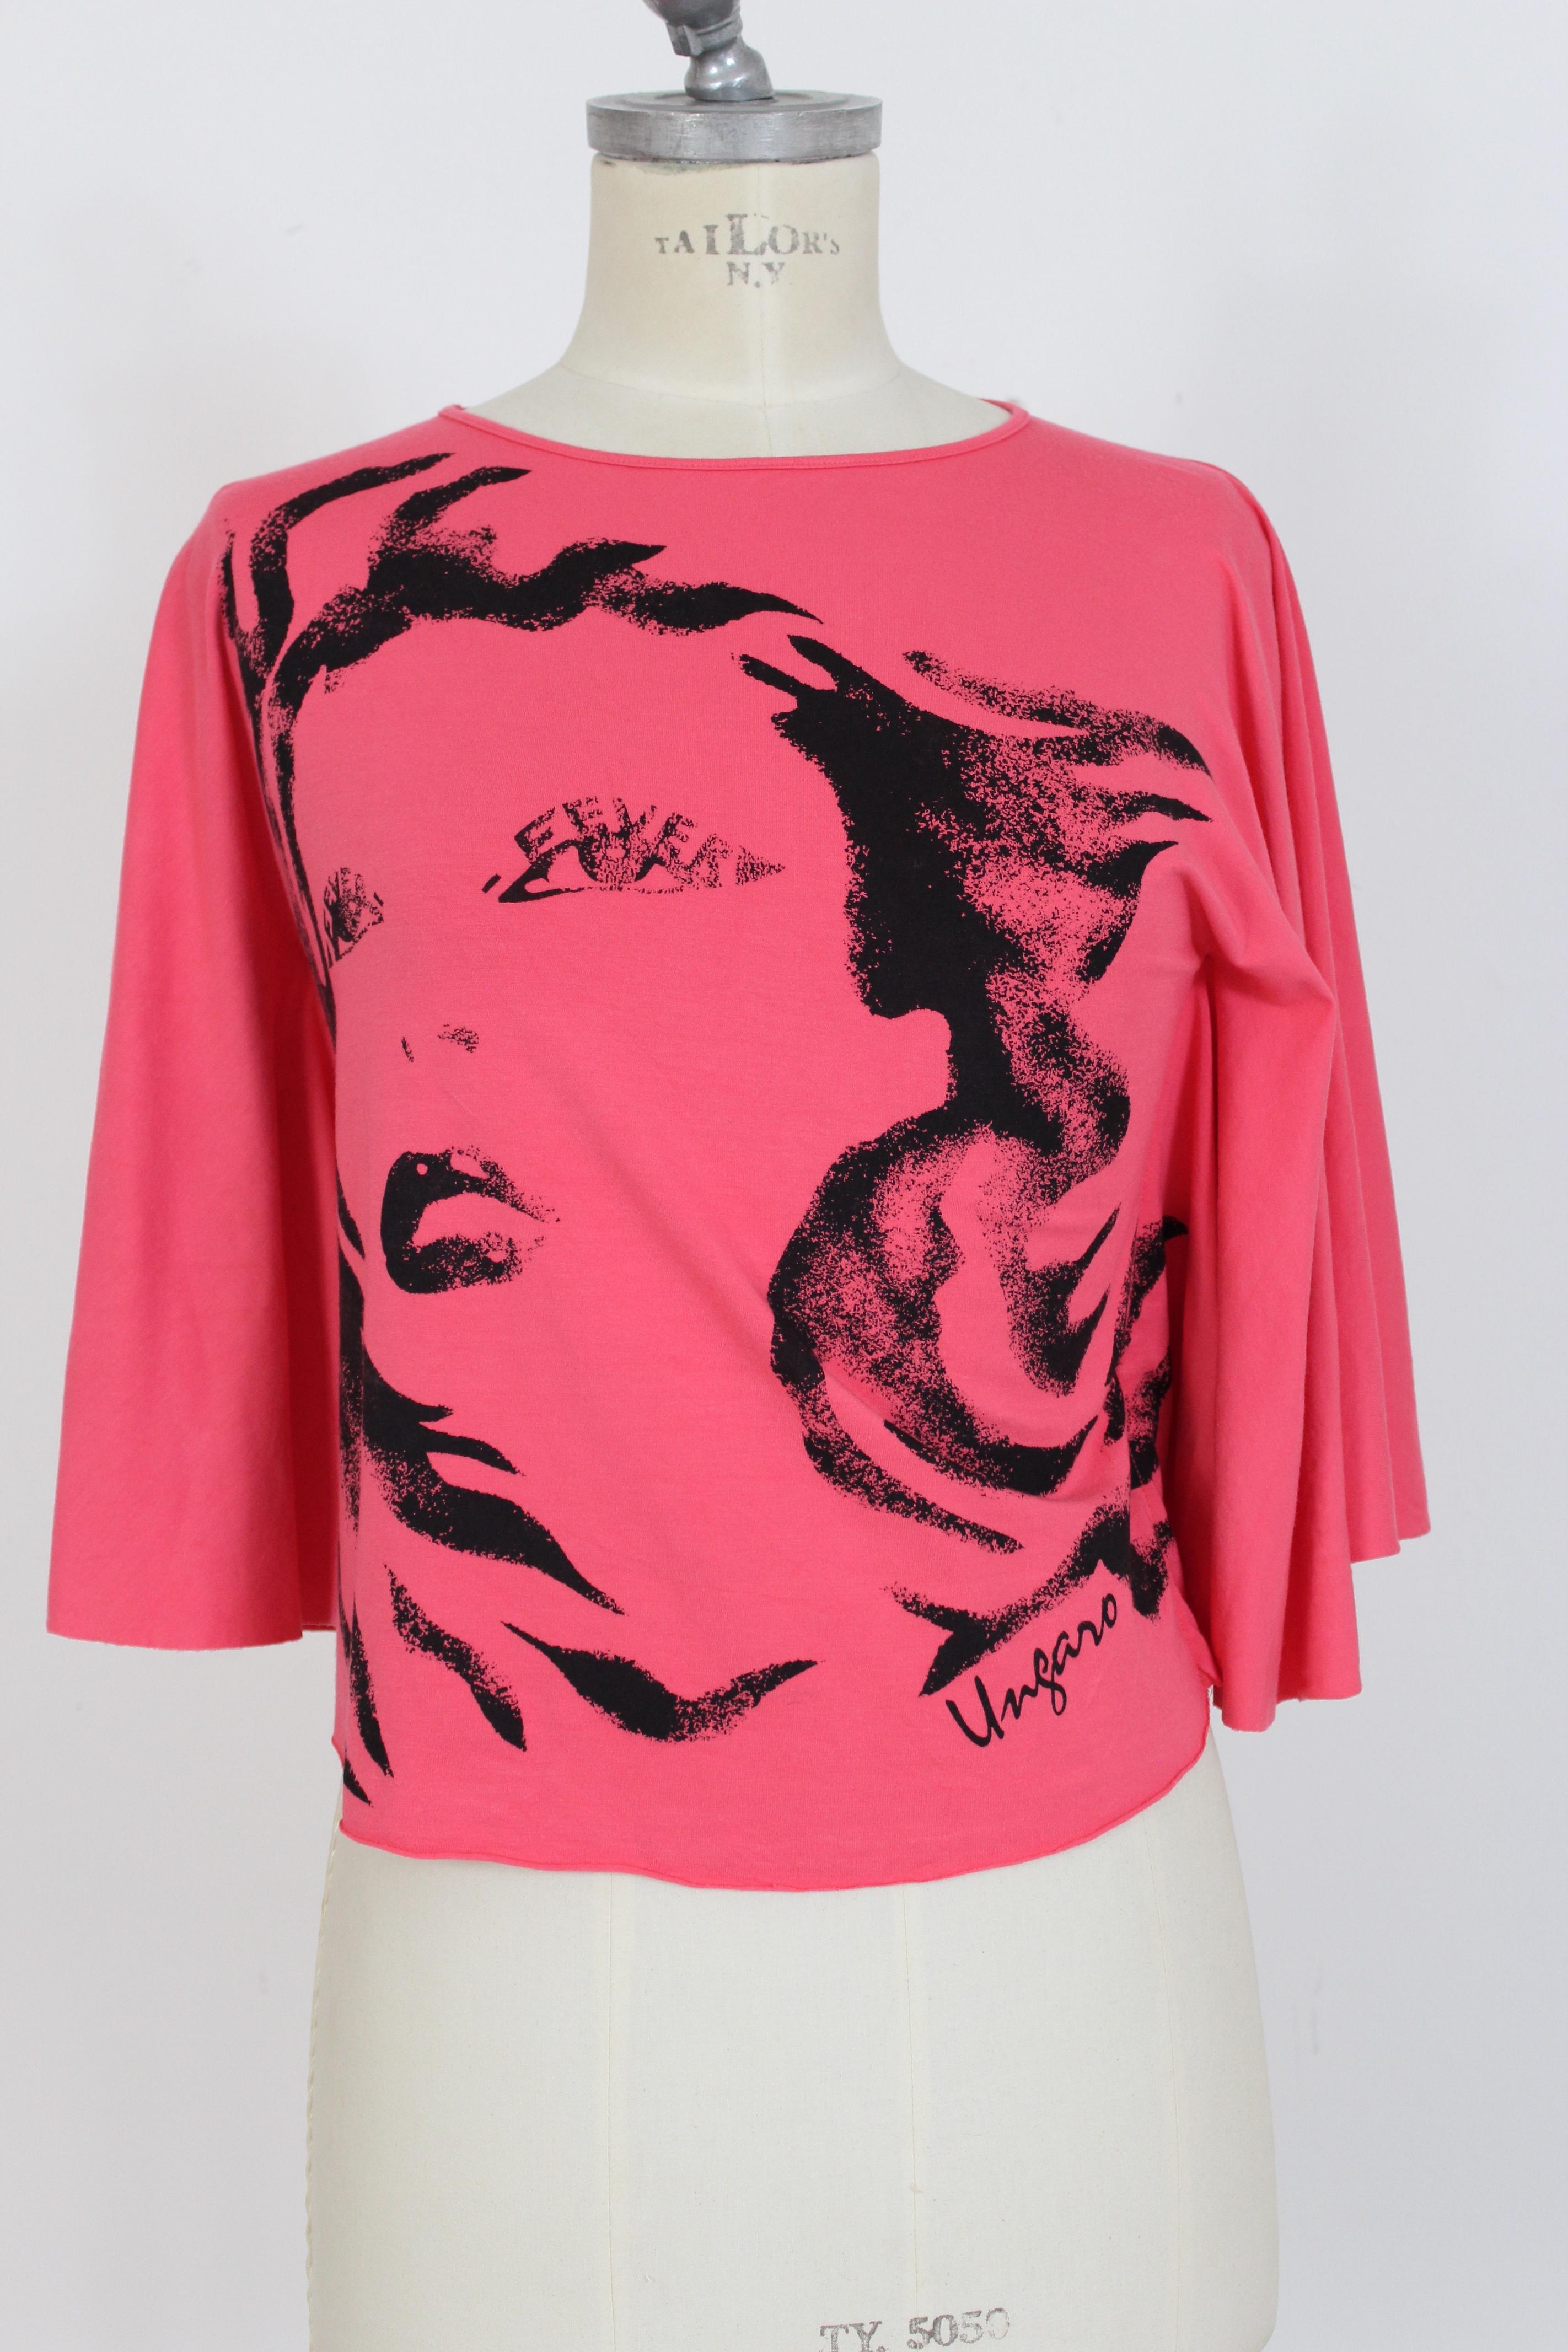 Emanuel Ungaro 90s vintage women's shirt. Short shirt with wide batwing sleeves. Pink color with black woman face print. Stretch cotton fabric. Made in Italy.

Condition: Excellent

Item used few times, it remains in its excellent condition. There